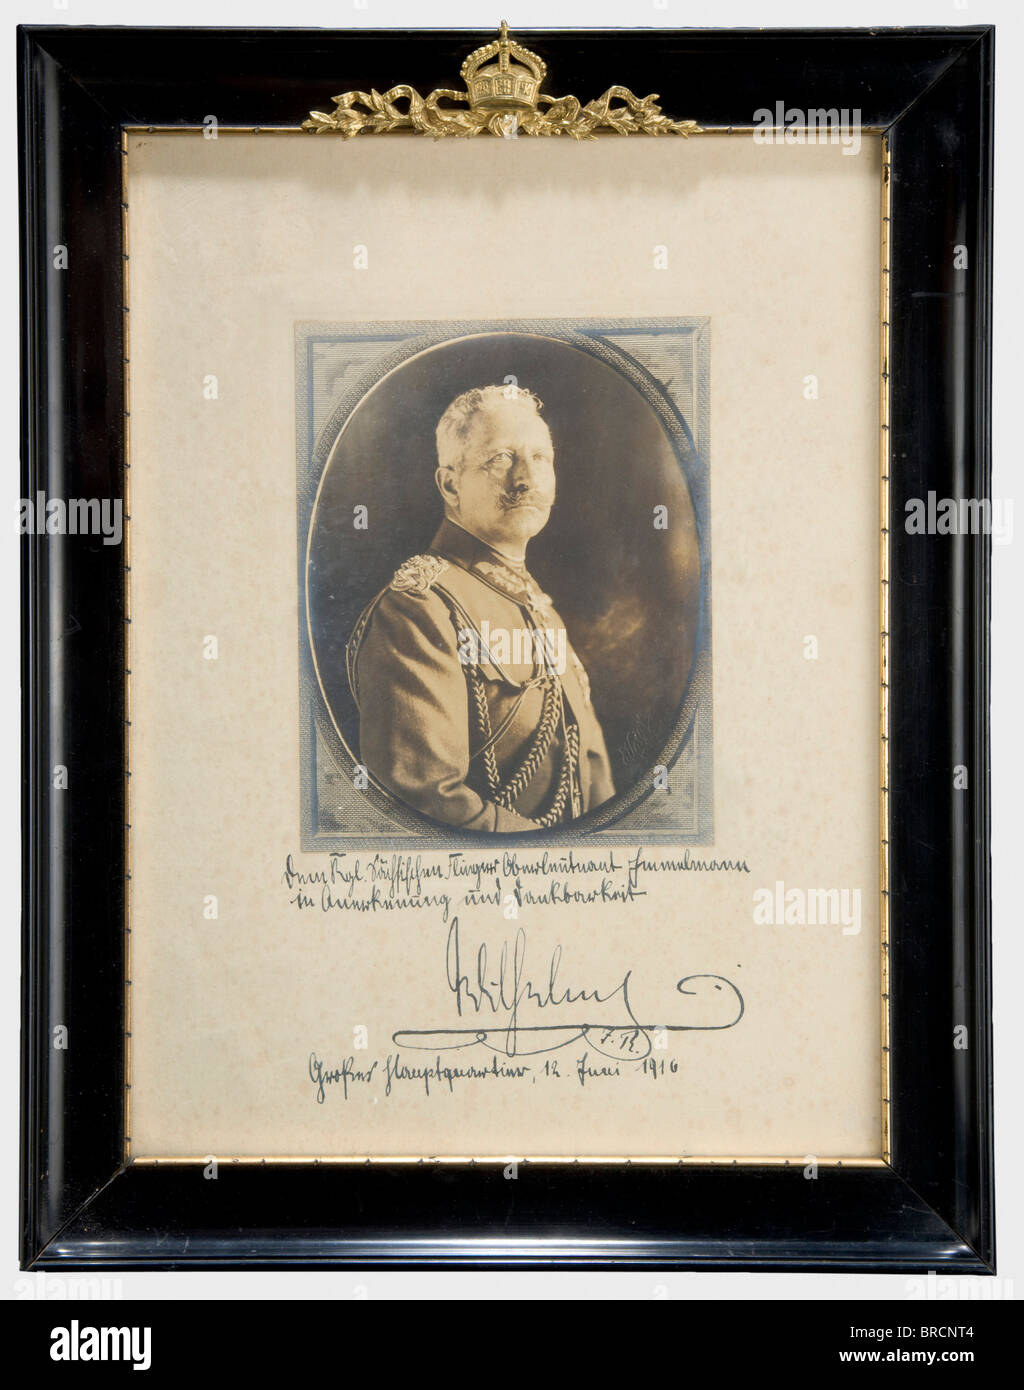 Oberleutnant Max Immelmann (1890 - 1916), an inscribed photograph of Kaiser Wilhelm II, 1916 An oval portrait of the Kaiser in field marshal's uniform. Photographer Voigt. With mount (slightly stained) with an ink dedication by the Kaiser, 'Dem Kgl. Sächsischen Flieger Oberleutnant Immelmann in Anerkennung und Dankbarkeit - Wilhelm I.R. - Großes Hauptquartier, 12 Juni 1916'. (To the Royal Saxon Pilot First Lieutenant Immelmann in Recognition and Gratitude - Wilhelm I.R. - Supreme Headquarters, 12 June 1916). Privately framed and under glass by Max Immelmann's b, Stock Photo